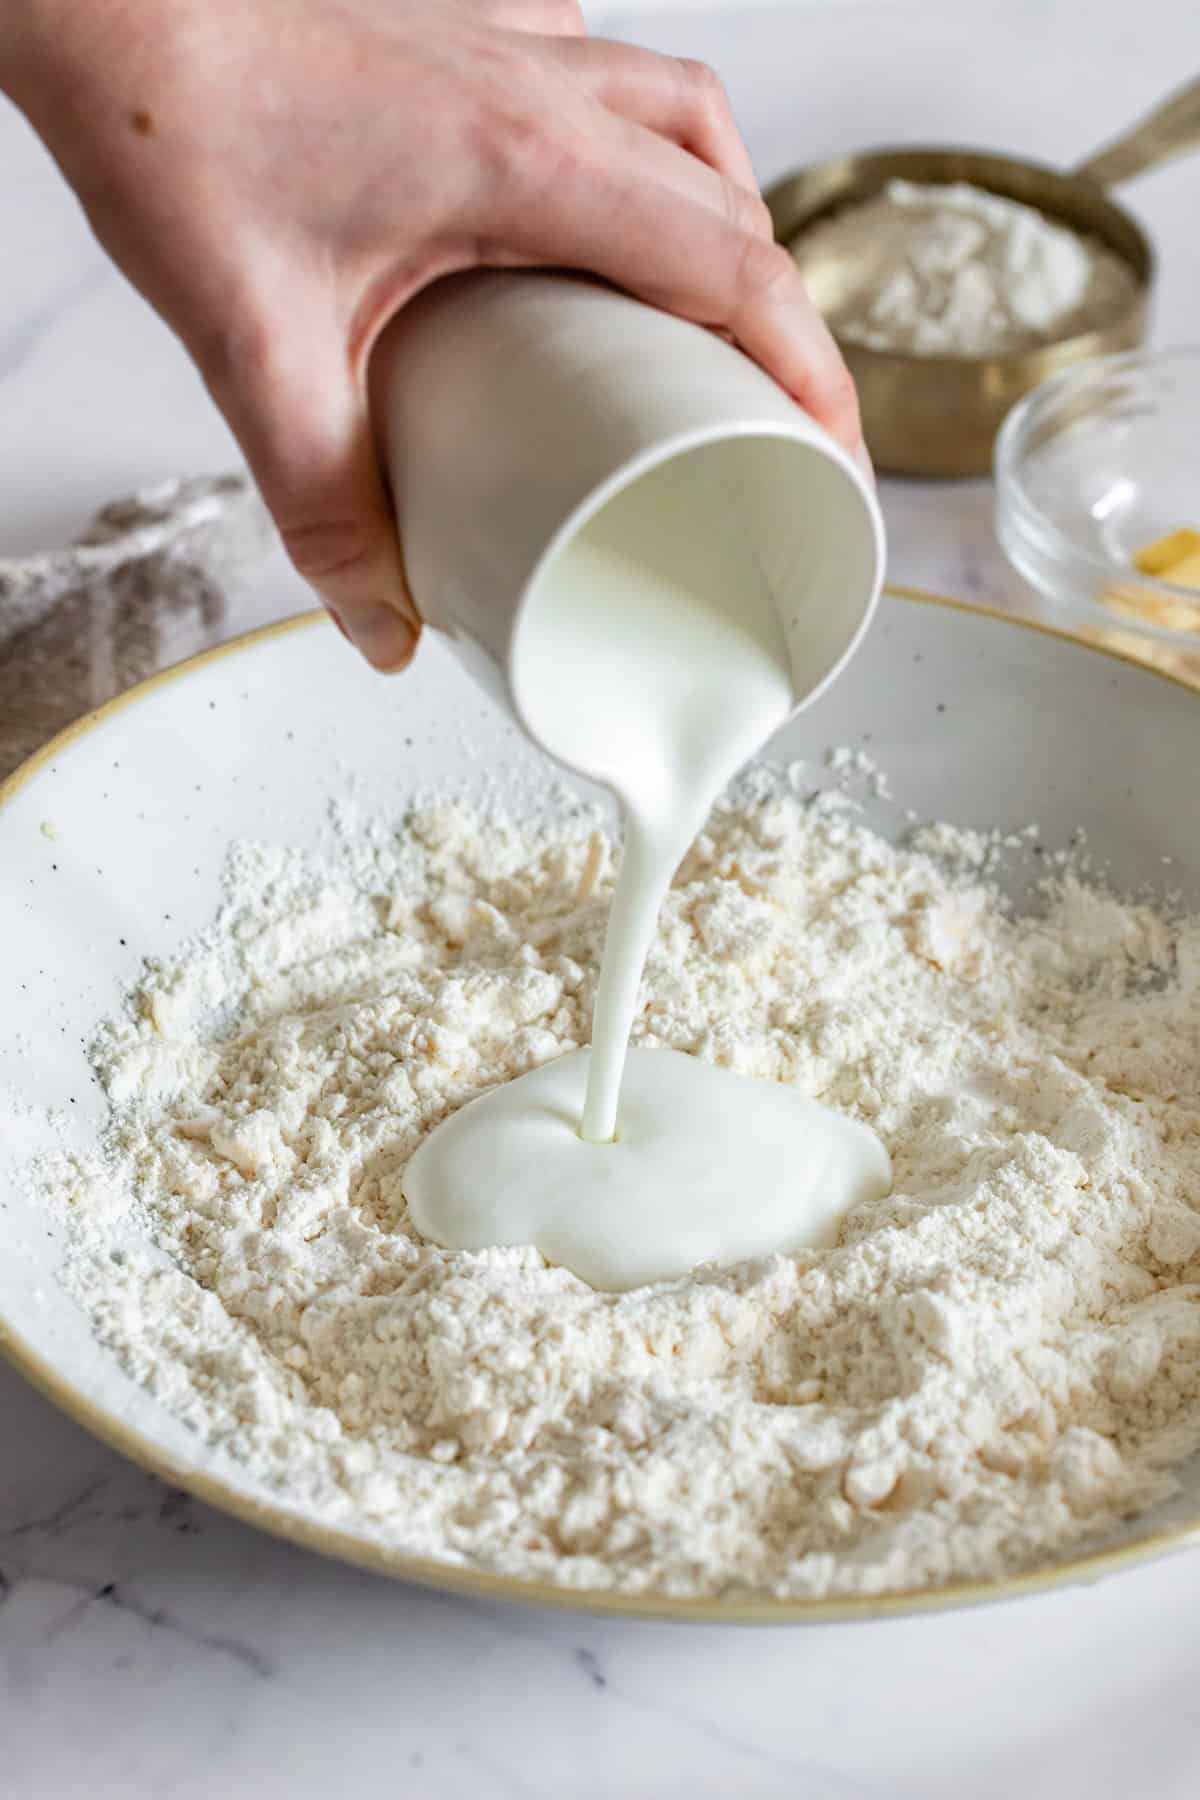 Buttermilk Being Poured into a Tan-Rimmed Bowl Filled with the Flour Mixture